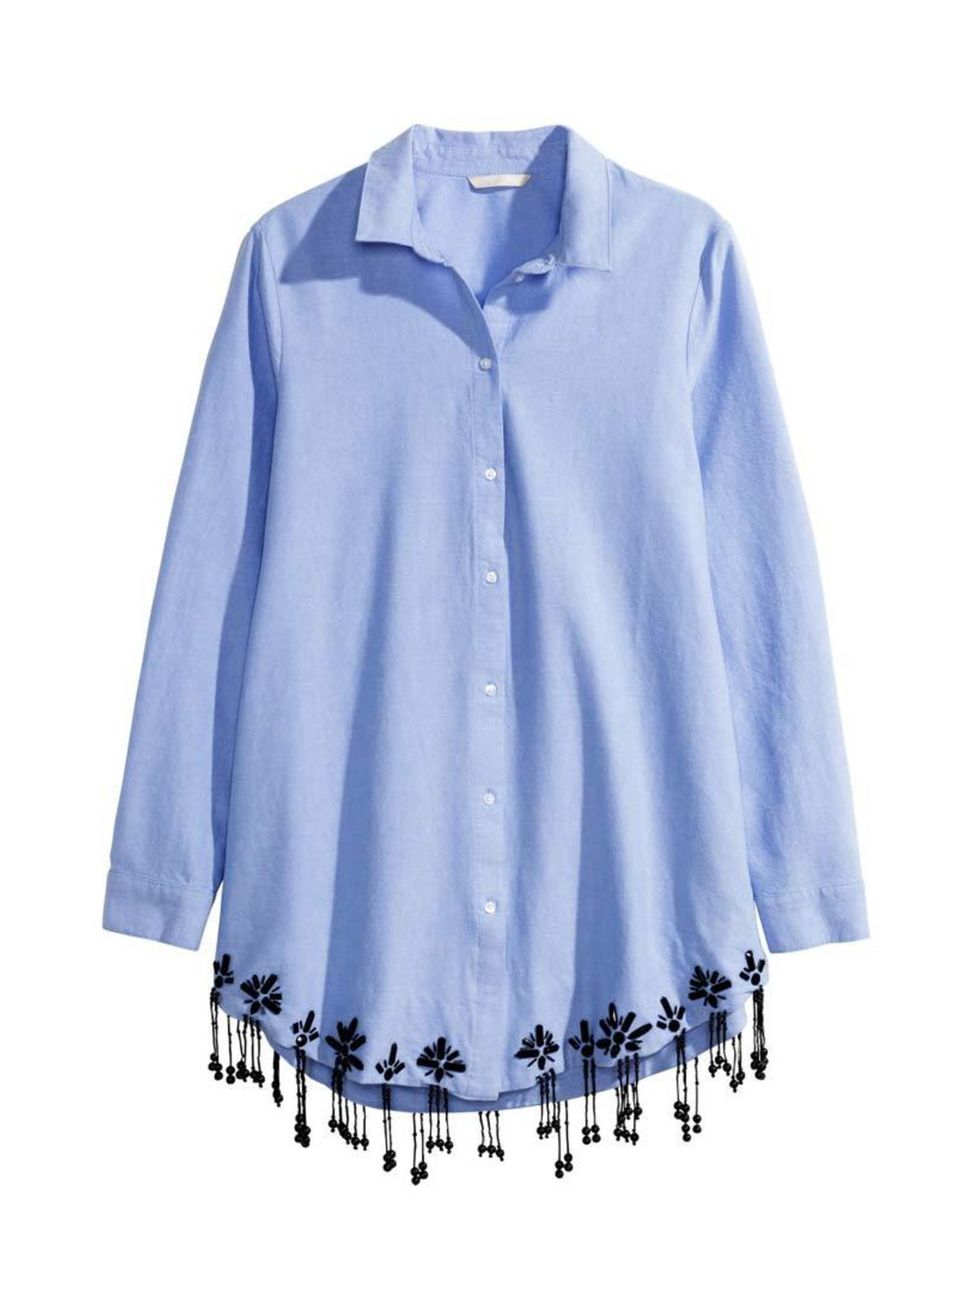 <p>Simple, with a twist; and on Designer Charlotte Wallace's shopping list.</p>

<p><a href="http://www.hm.com/gb/product/62892?article=62892-A" target="_blank">H&M</a> shirt, £39.99</p>